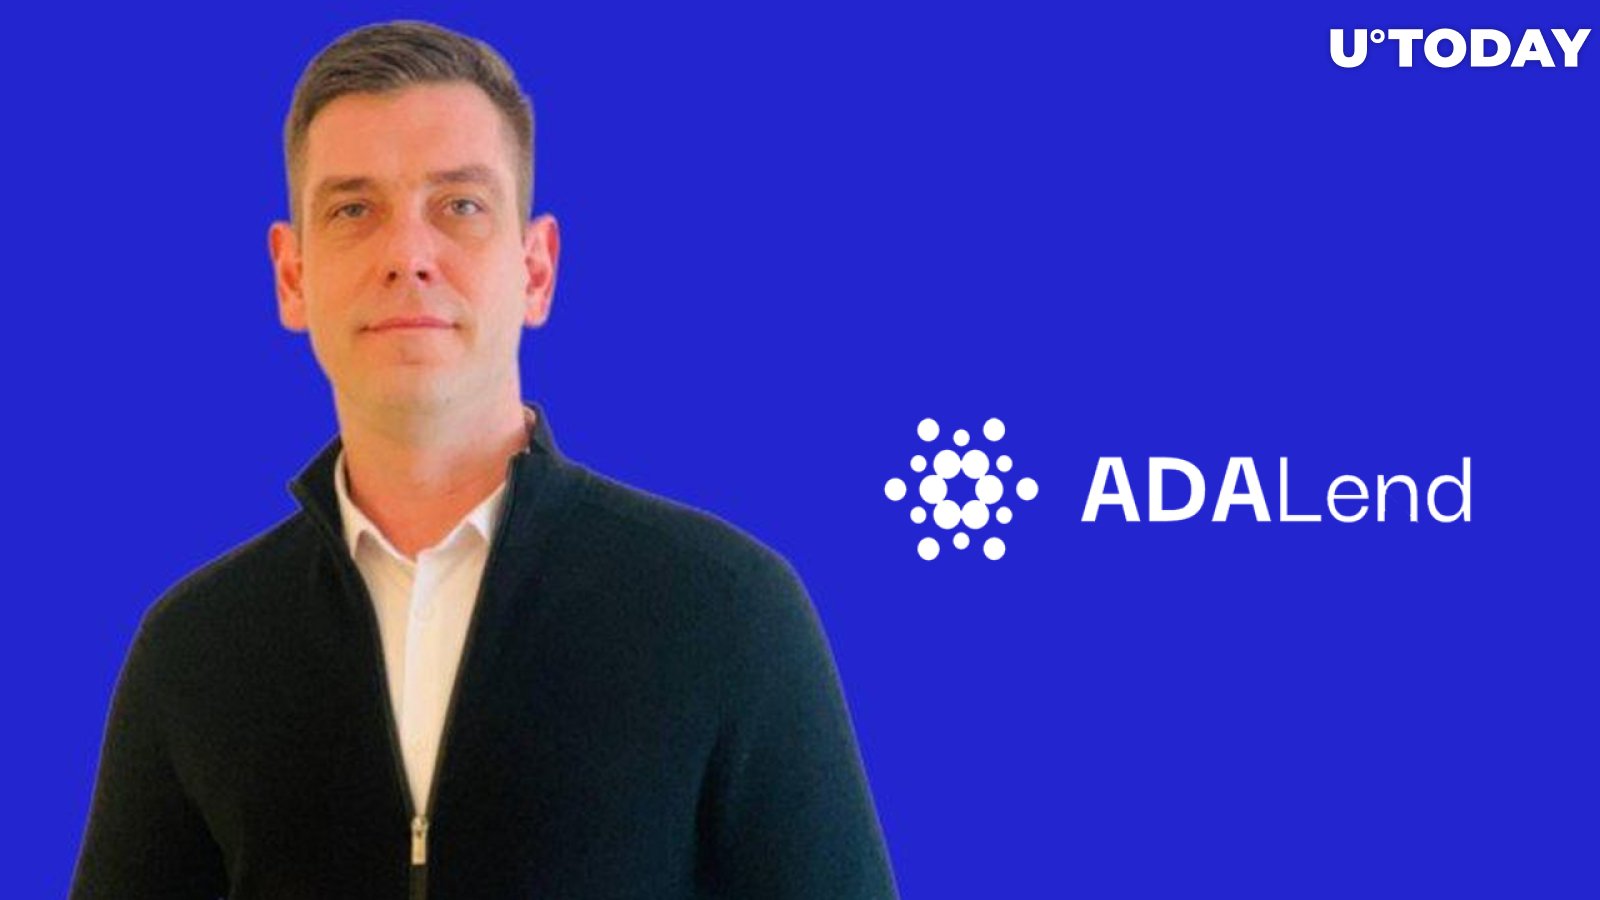 ADALend's CEO Kaspars Koskins Explains Why Cardano Is Superior to Ethereum